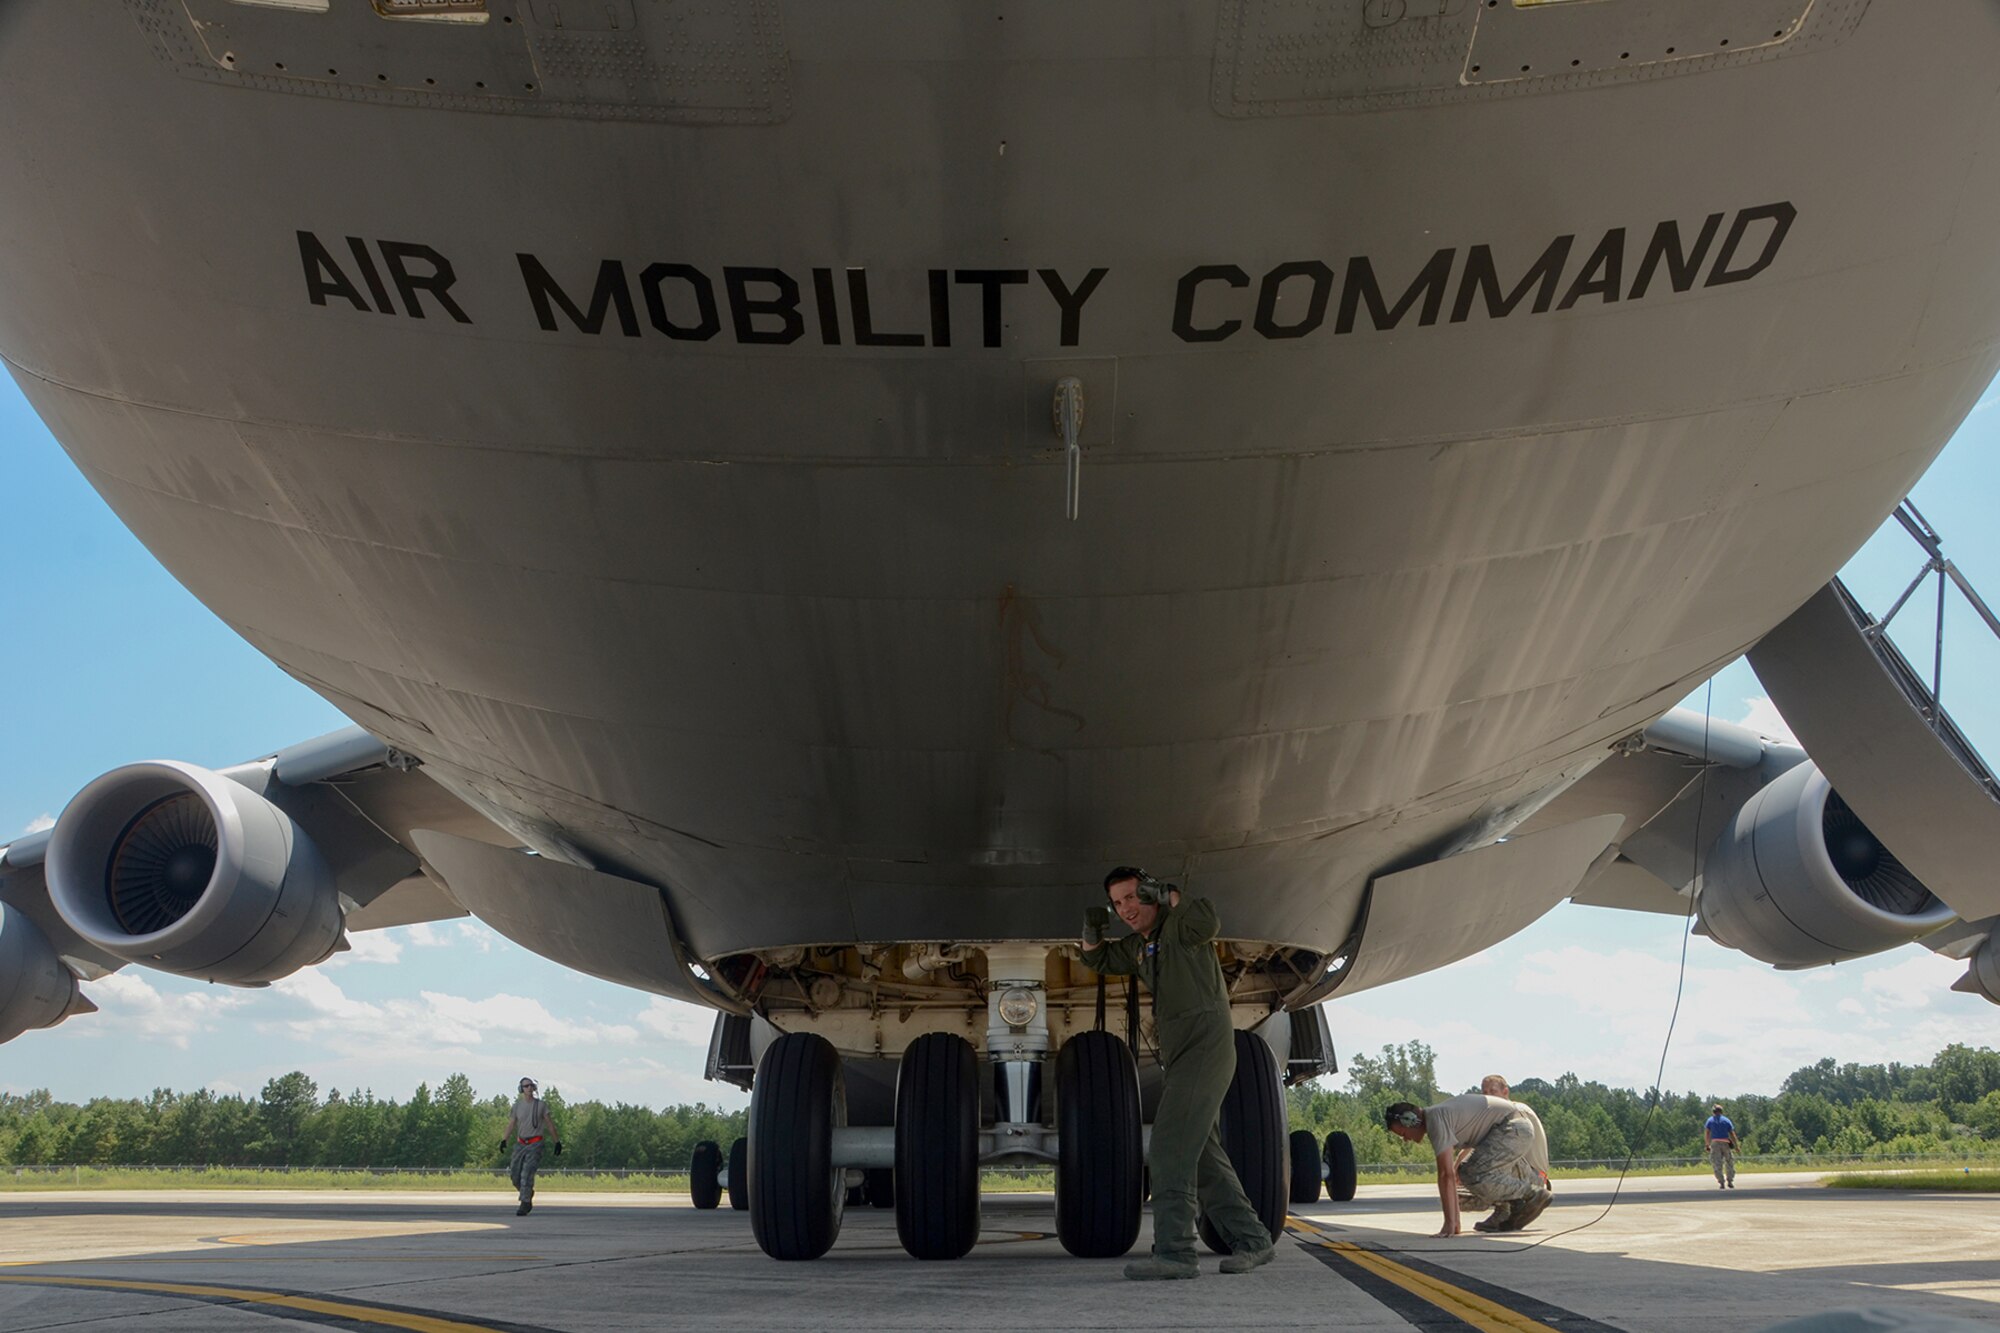 U.S. Air Force Tech. Sgt. Jake Schlemmer, a flight engineer assigned to the 709th Airlift Squadron, poses under a U.S. Air Force Lockheed C-5 Galaxy transport aircraft at McEntire Joint National Guard Base, S.C., July 8, 2016. Approximately 300 U.S. Airmen and 12 F-16 Fighting Falcon jets from the 169th Fighter Wing at McEntire JNGB, S.C., are deploying to Osan Air Base, Republic of Korea, as the 157th Expeditionary Fighter Squadron in support of the U.S. Pacific Command Theater Security Package. (U.S. Air National Guard photo by Airman 1st Class Megan Floyd)